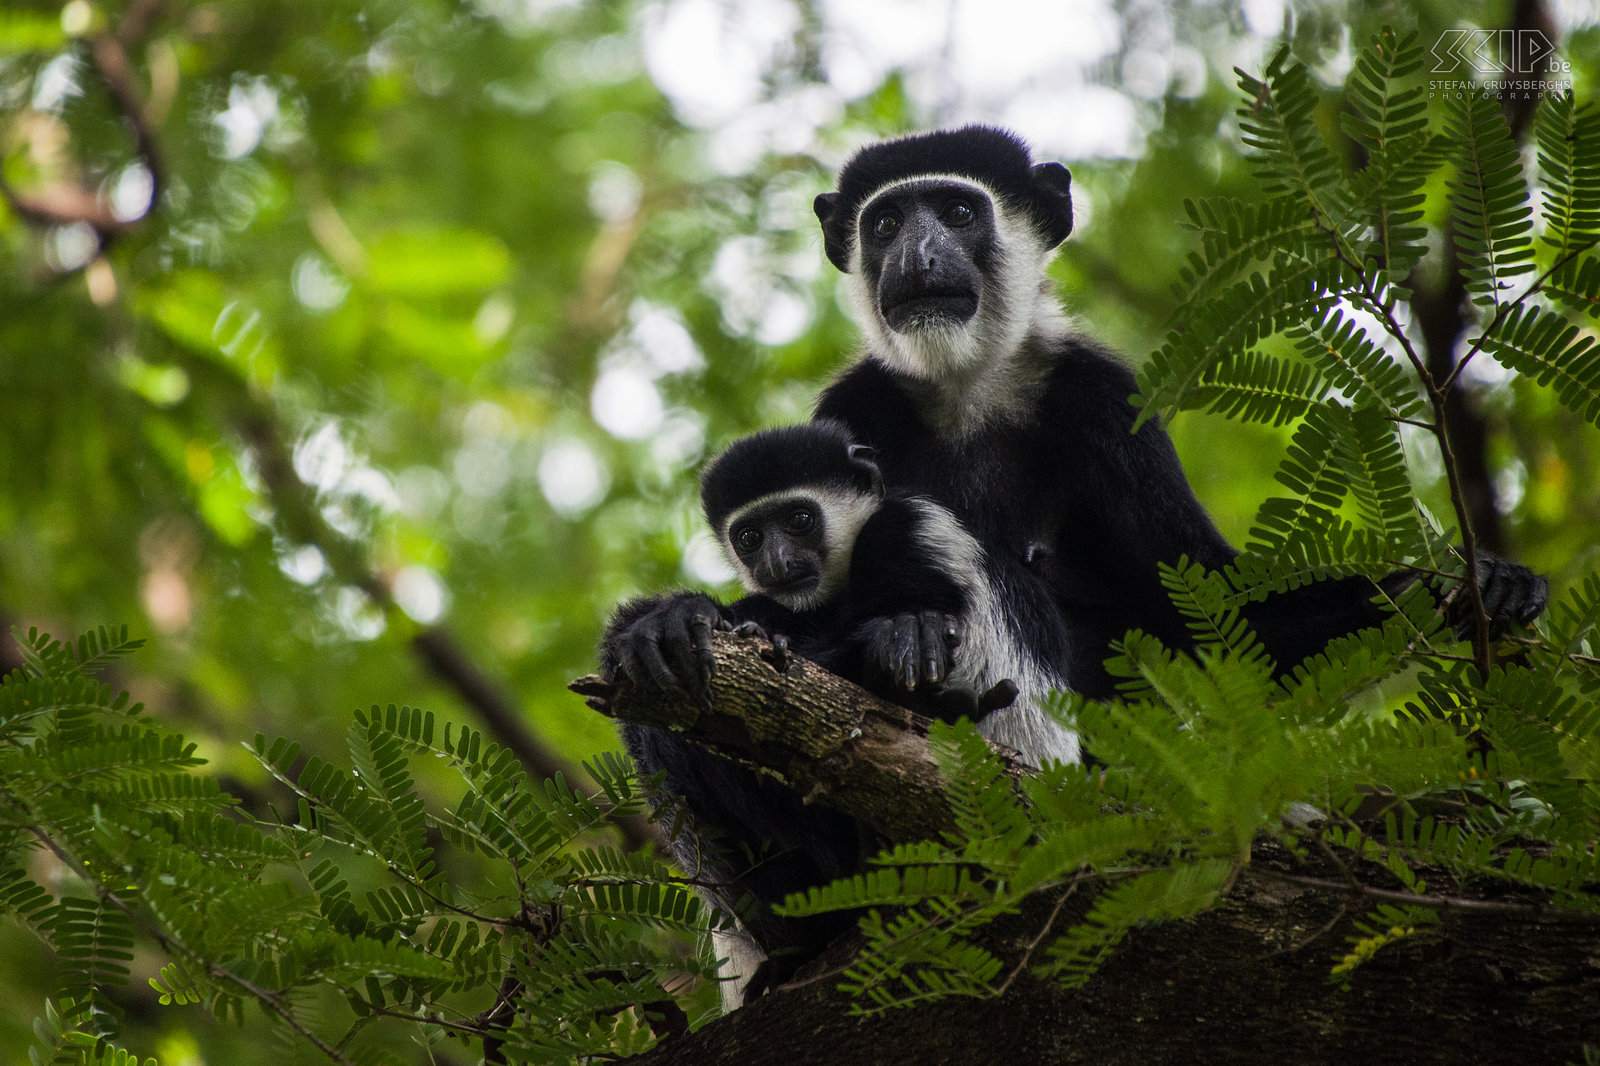 Mago - Baby colobus monkey with mother A baby black-and-white colobus monkey sitting with its mother high up in the tree. Stefan Cruysberghs